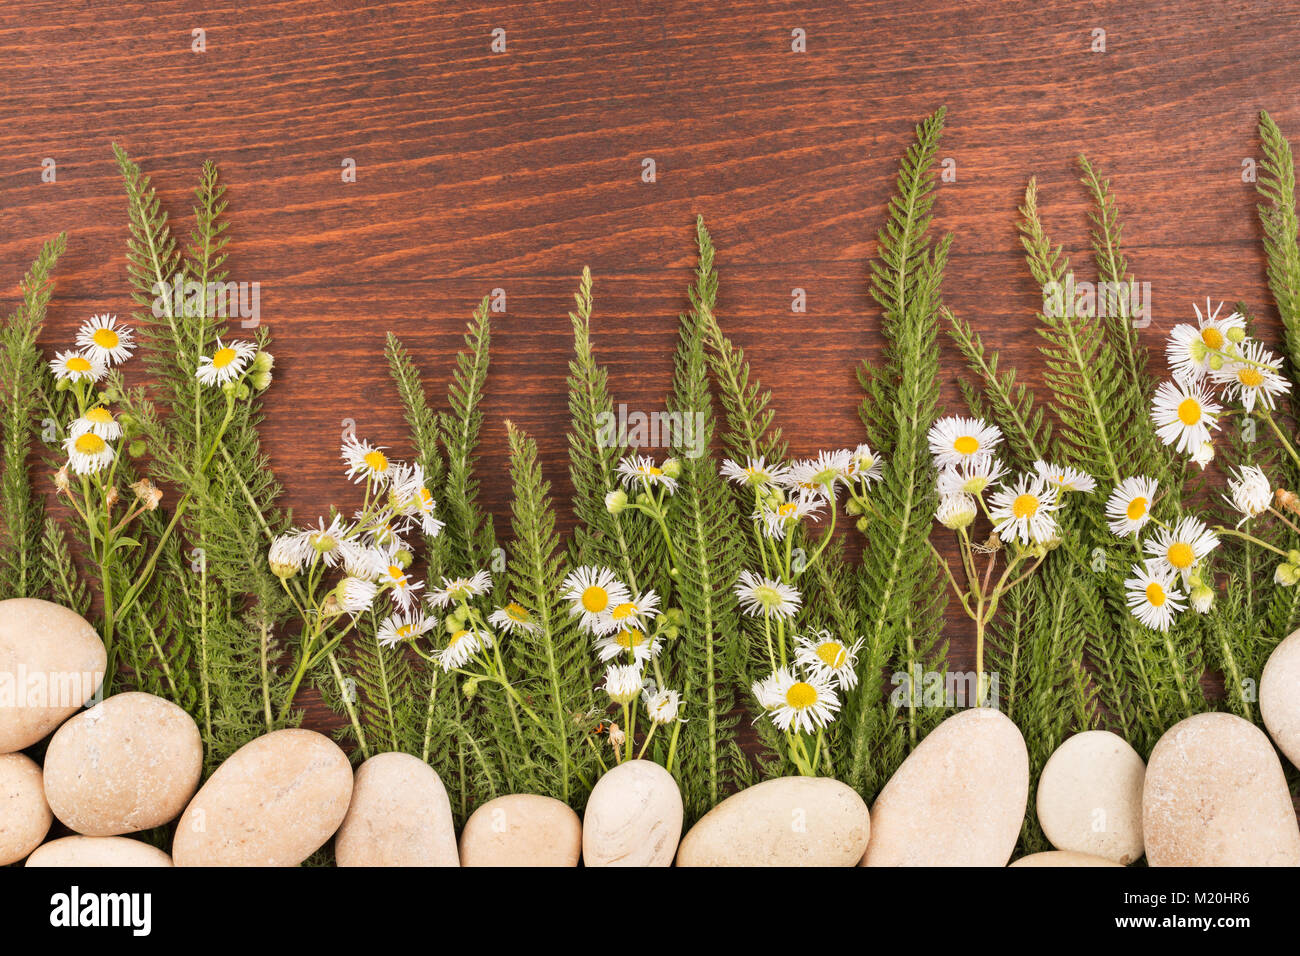 Wildflowers growing from white stones on a dark wooden background. Conceptual image Stock Photo